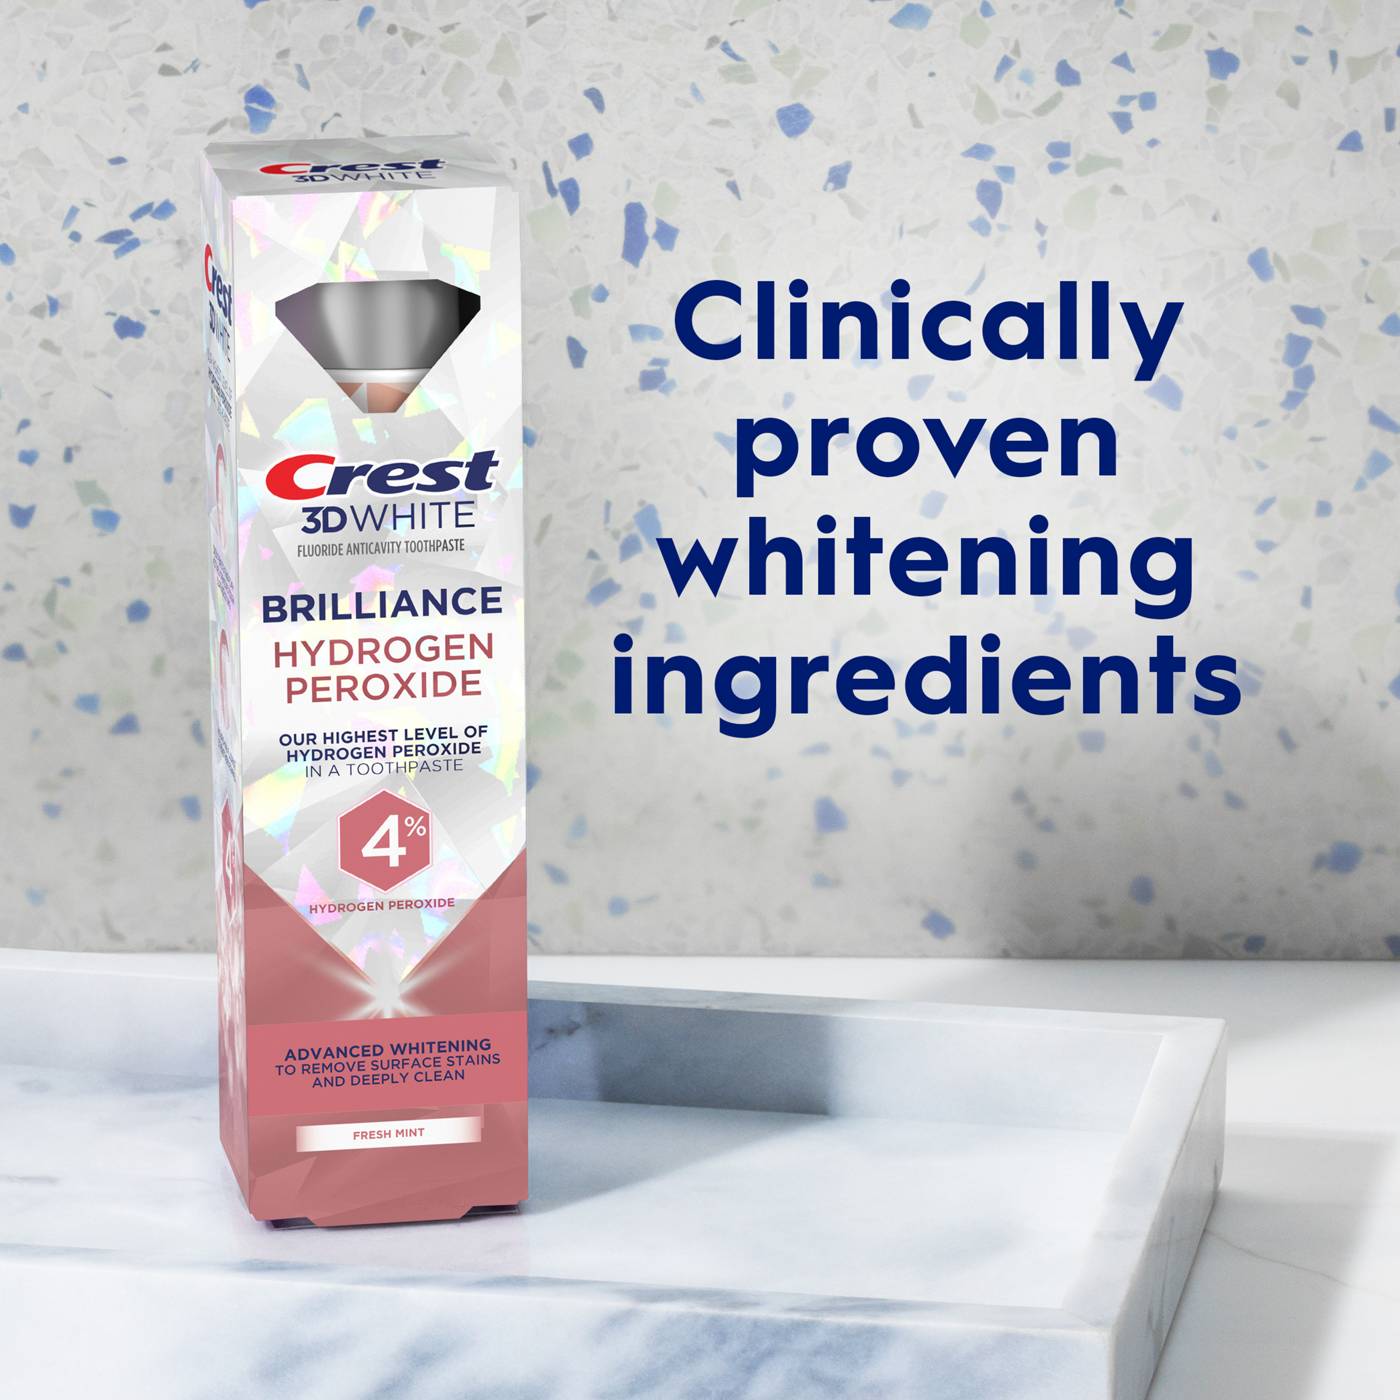 Crest 3D White Brilliance Hydrogen Peroxide Toothpaste - Fresh Mint; image 6 of 7